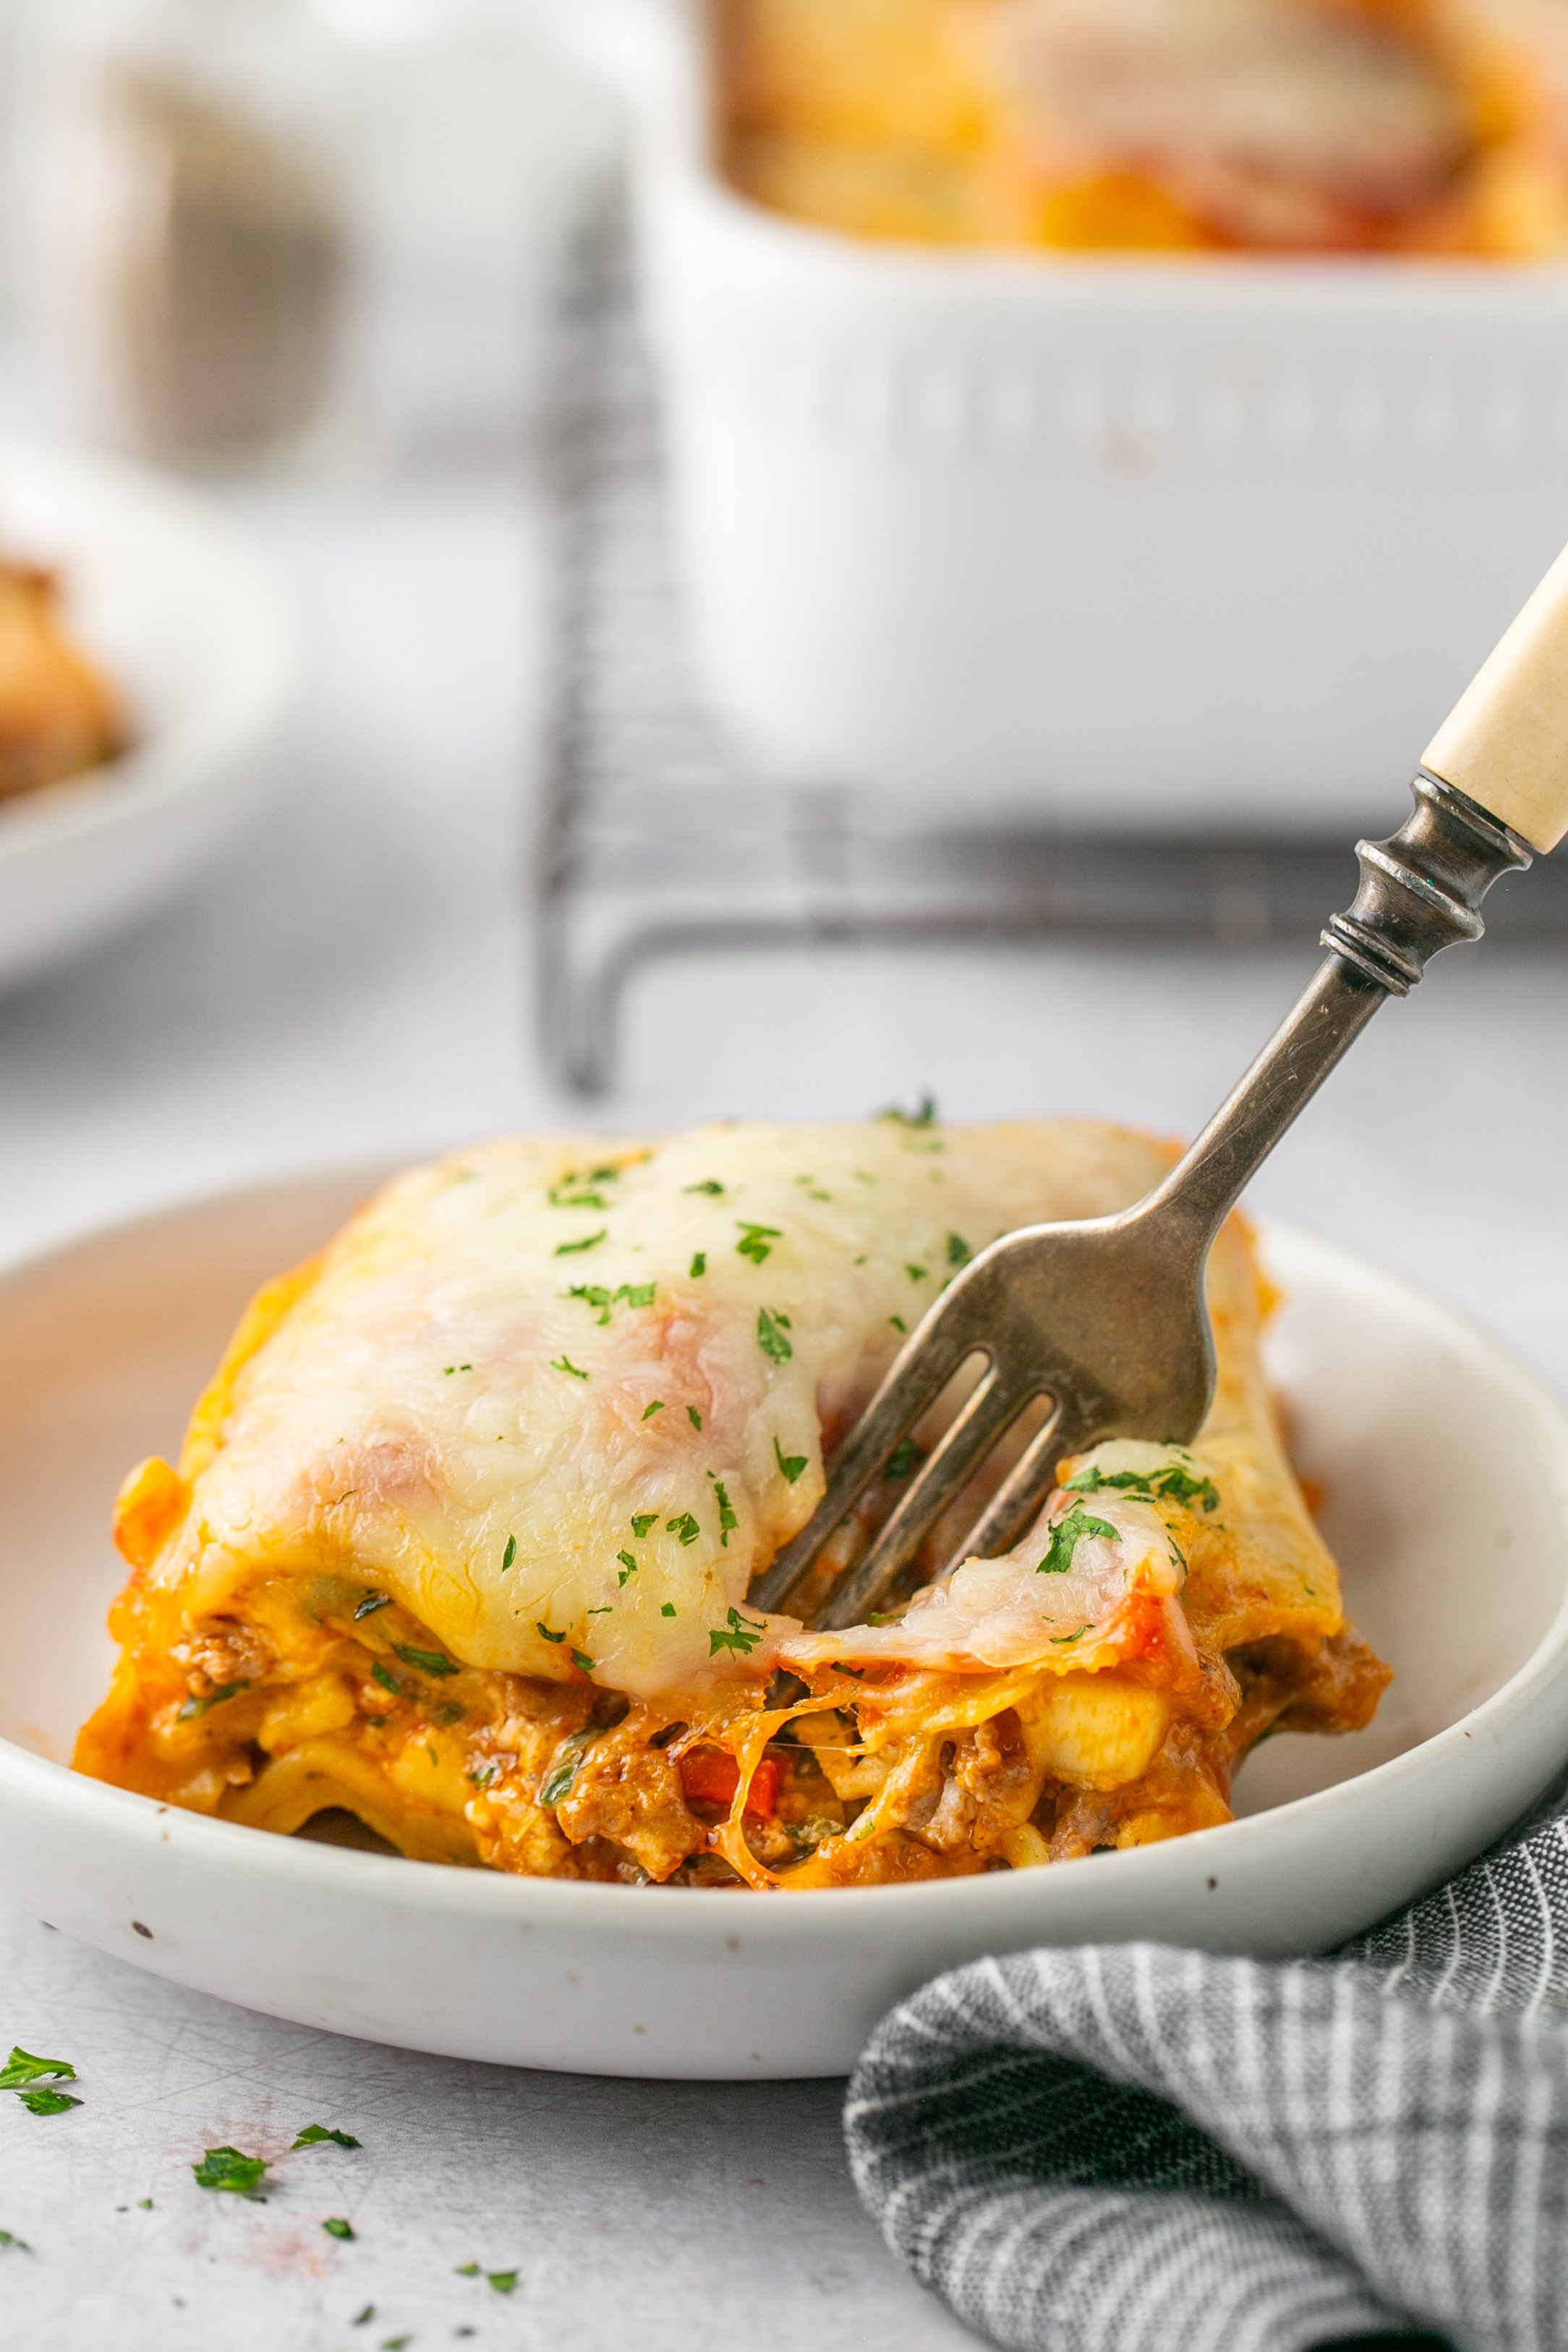 A fork in a slice of lasagna sitting on a white bowl. The bowl is sitting on a grey surface and is surrounded by a napkin. Out of focus in the background is a white casserole dish filled with lasagna on a cooling rack and a few dishes.